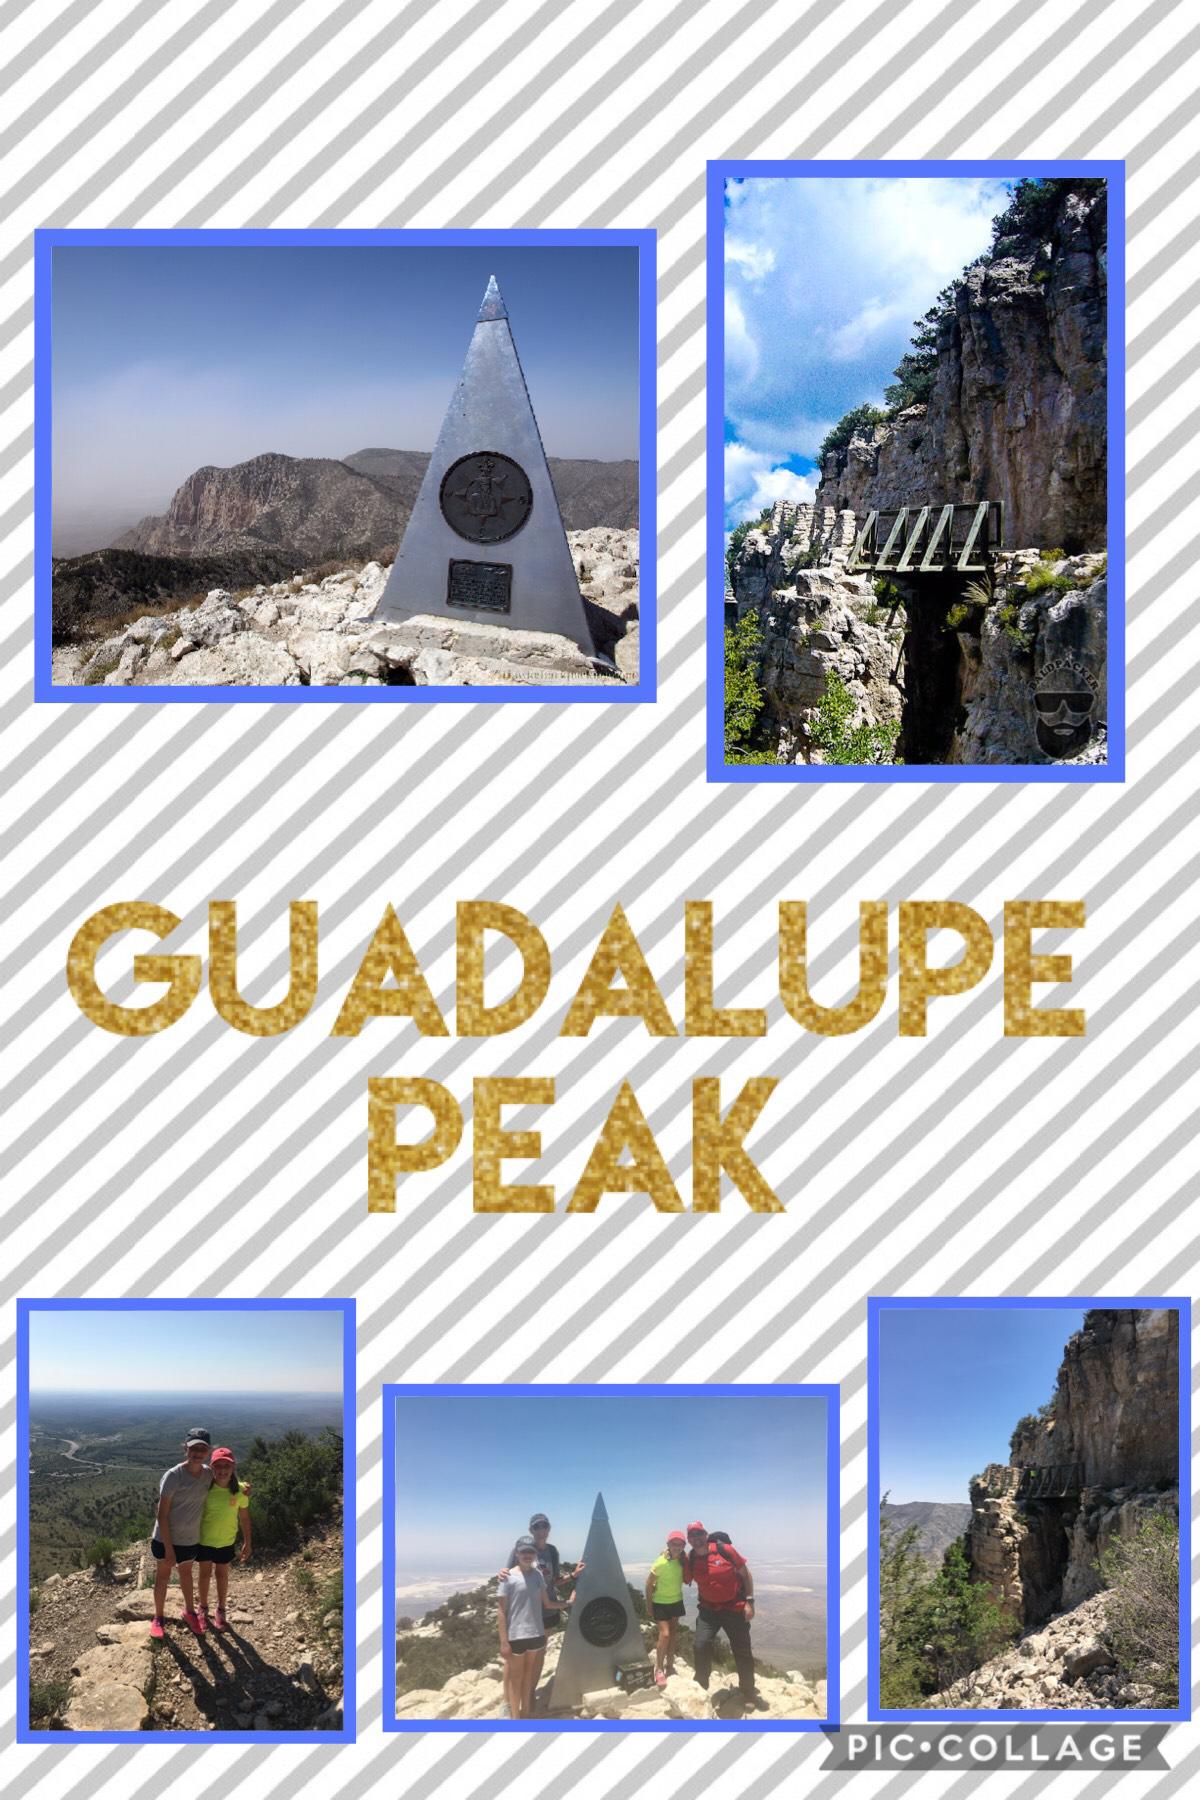 Guadalupe Peak is the tallest mountain in Texas! I personally have climbed it! The pictures on the bottom are ones we took when we were there! It was an Awesome hike! ❤️❤️❤️❤️❤️🏞🌄